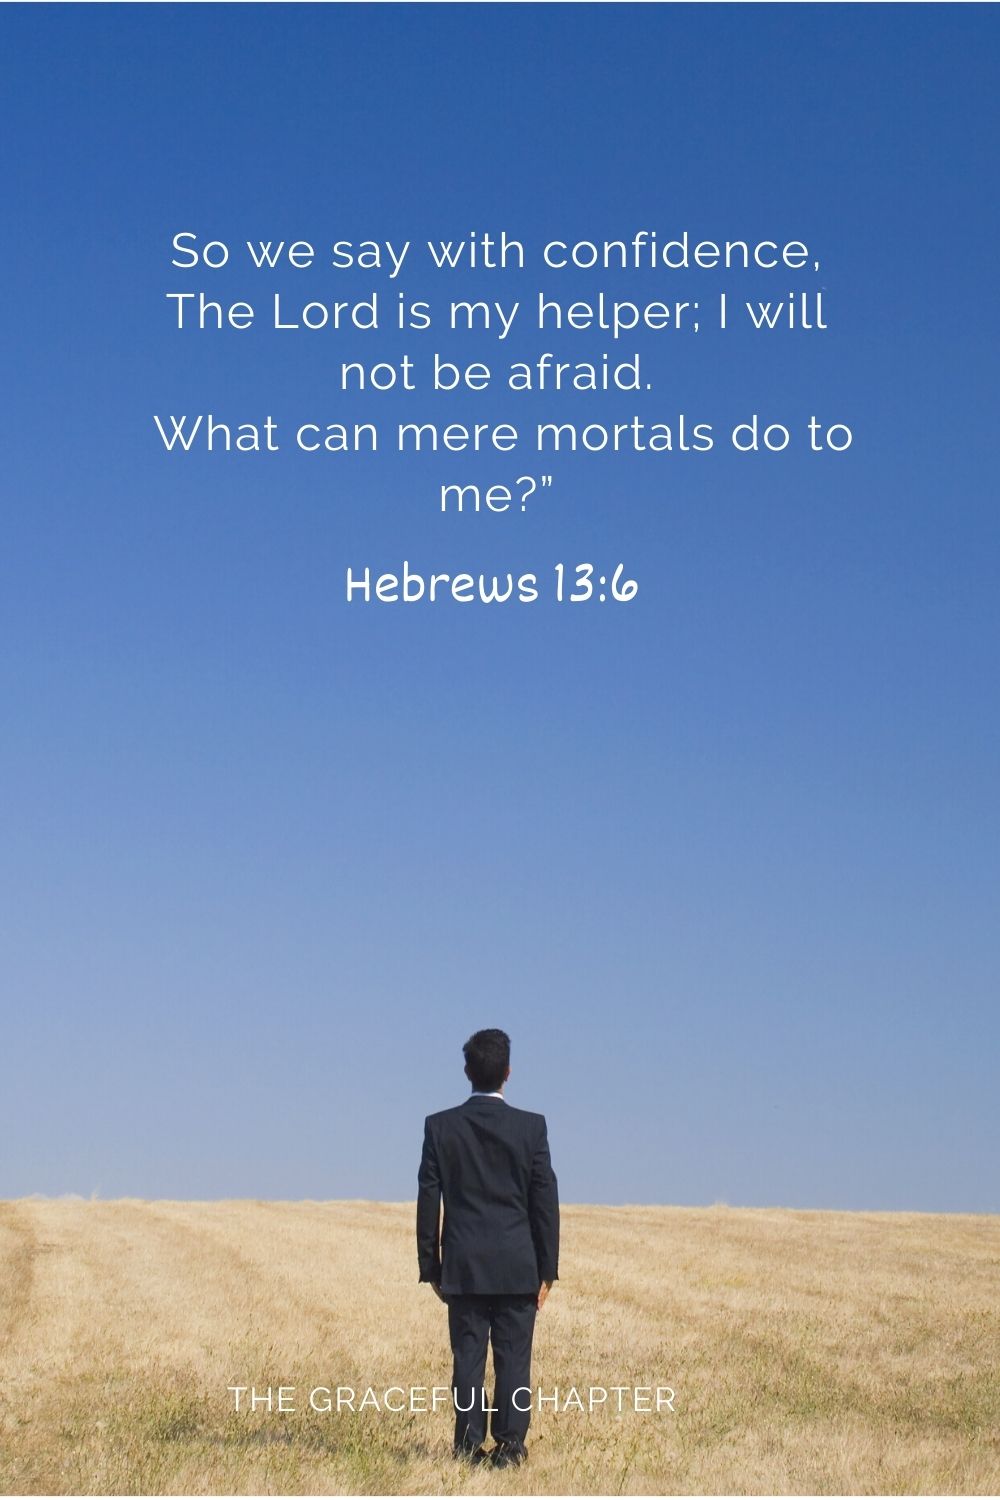 So we say with confidence, The Lord is my helper; I will not be afraid.  What can mere mortals do to me?” Hebrews 13:6